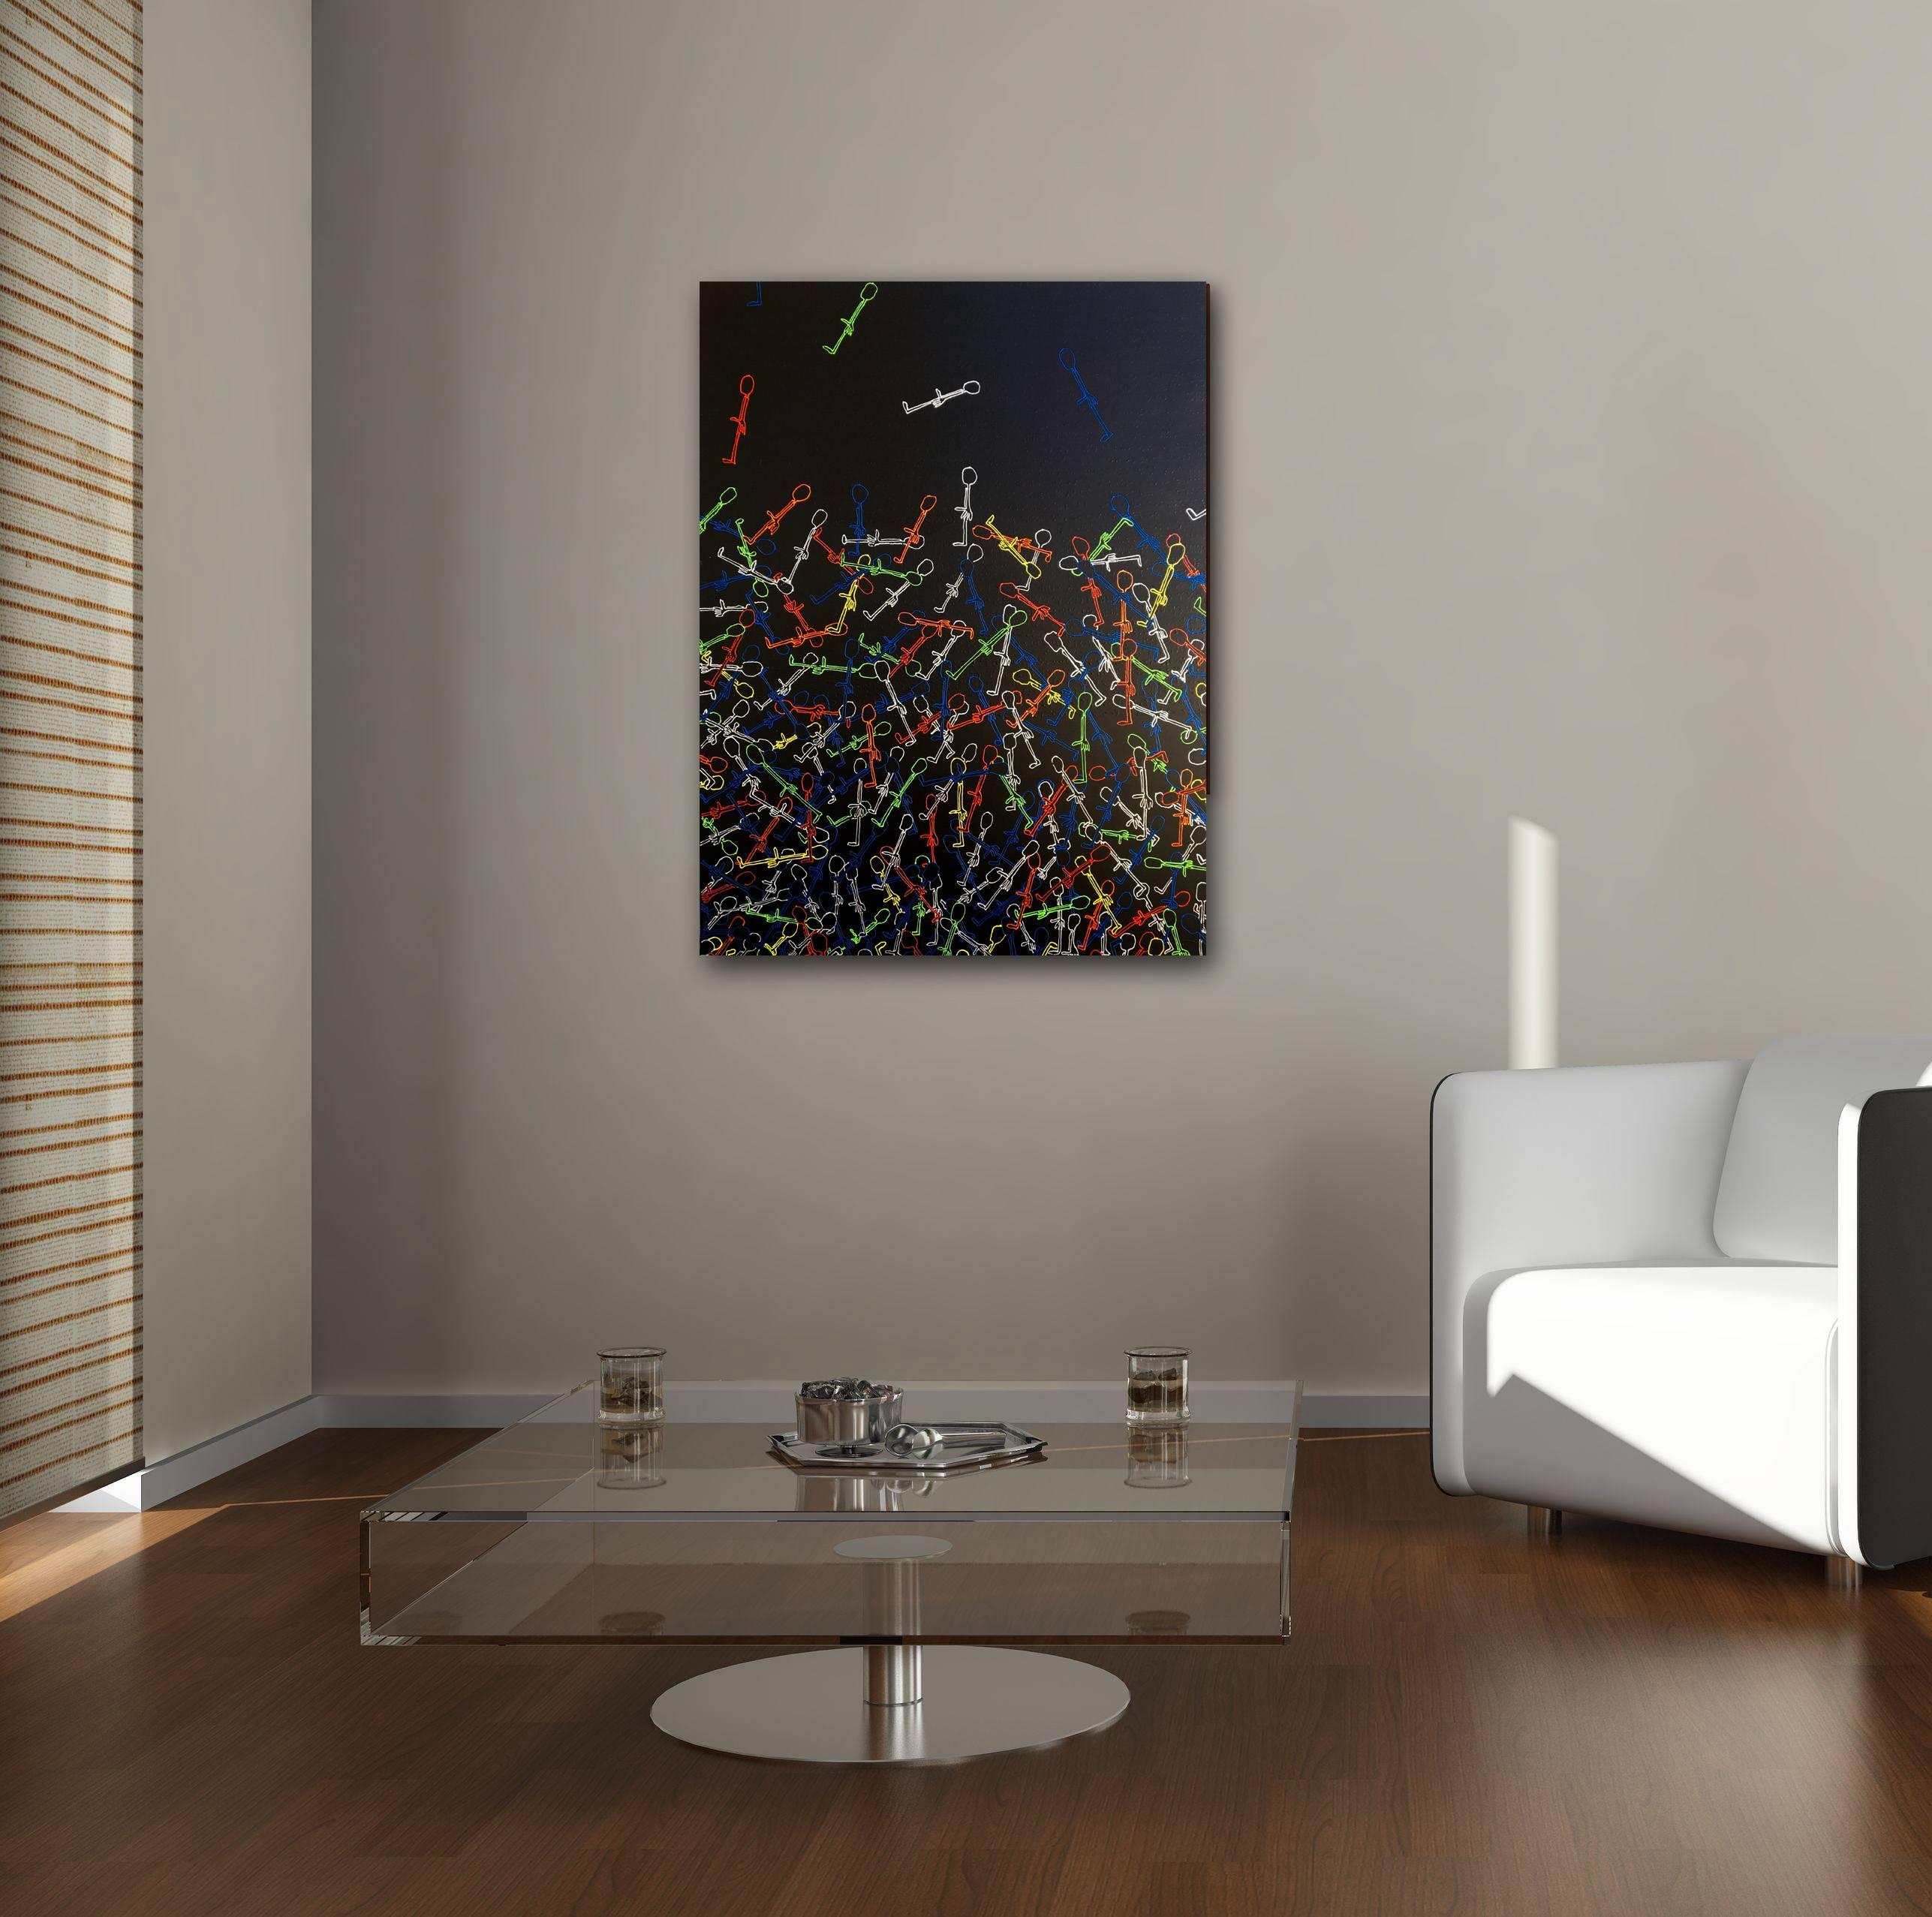 A Different Crowd II - Original Colorful Artwork on Canvas - Painting by Ricky Hunt